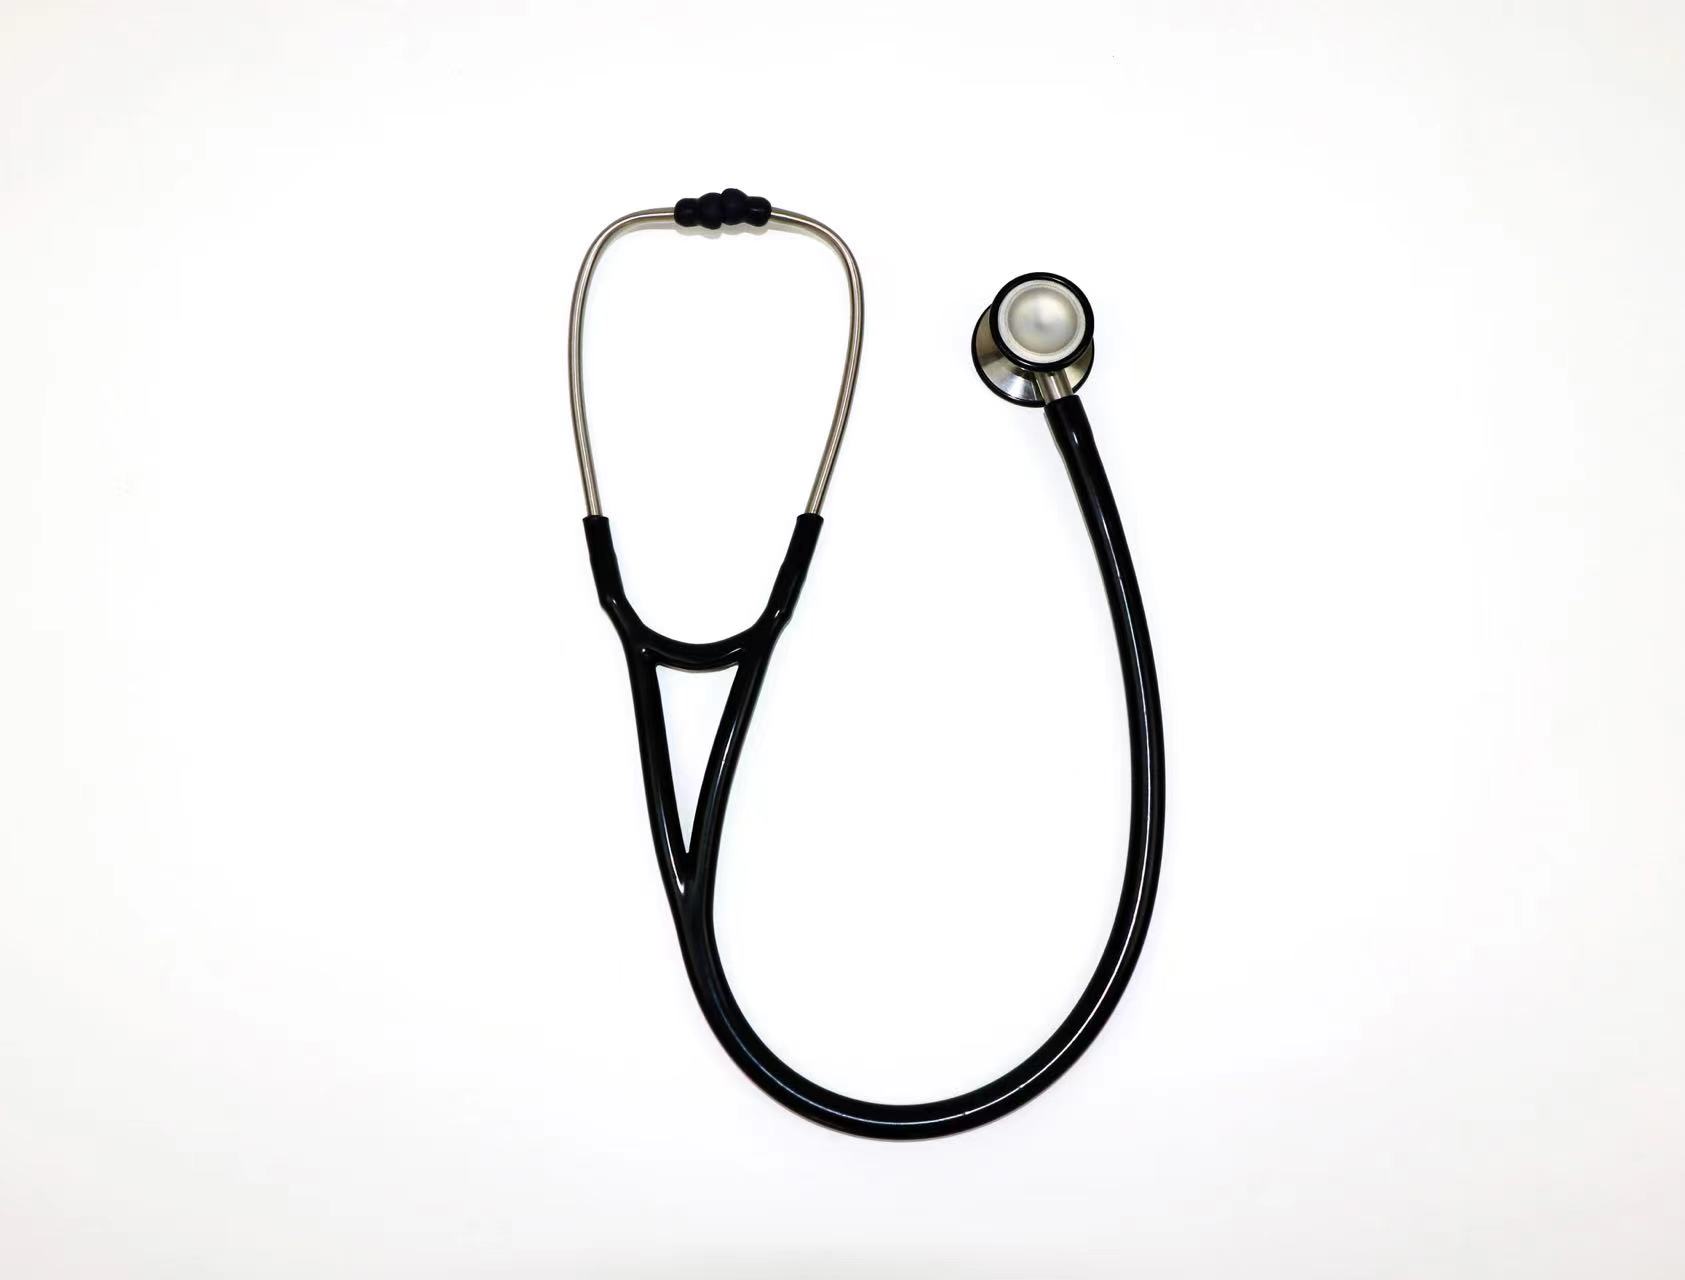 Cardiology stainless steel stethoscope（Double sided diaphragm）